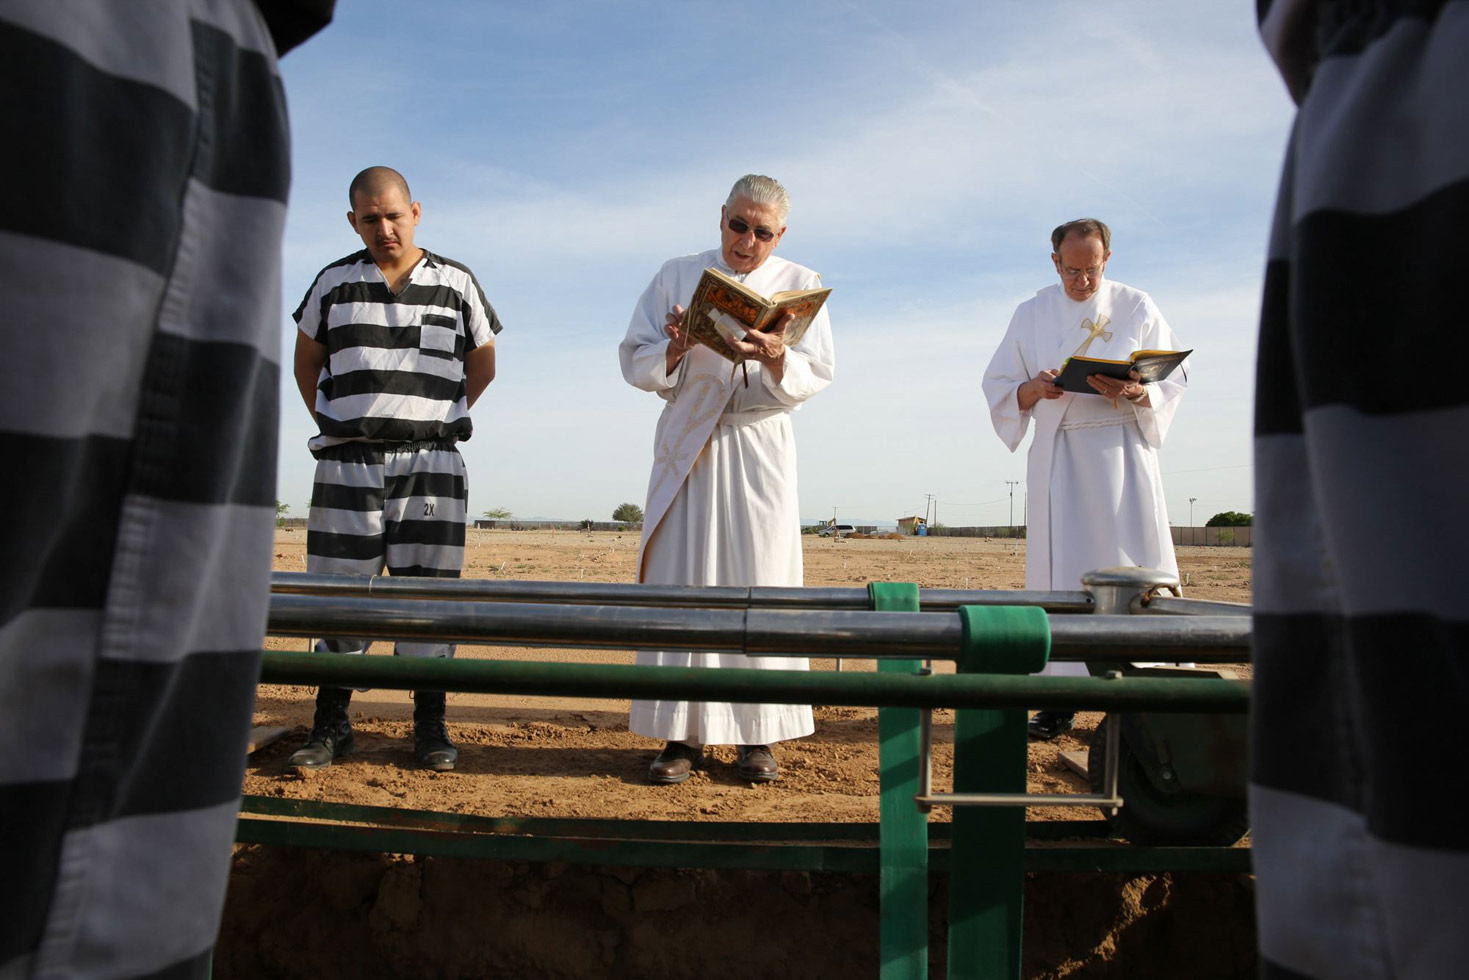 Two priests and inmates perform burial duty at Whitetanks cemetery, near Phoenix.